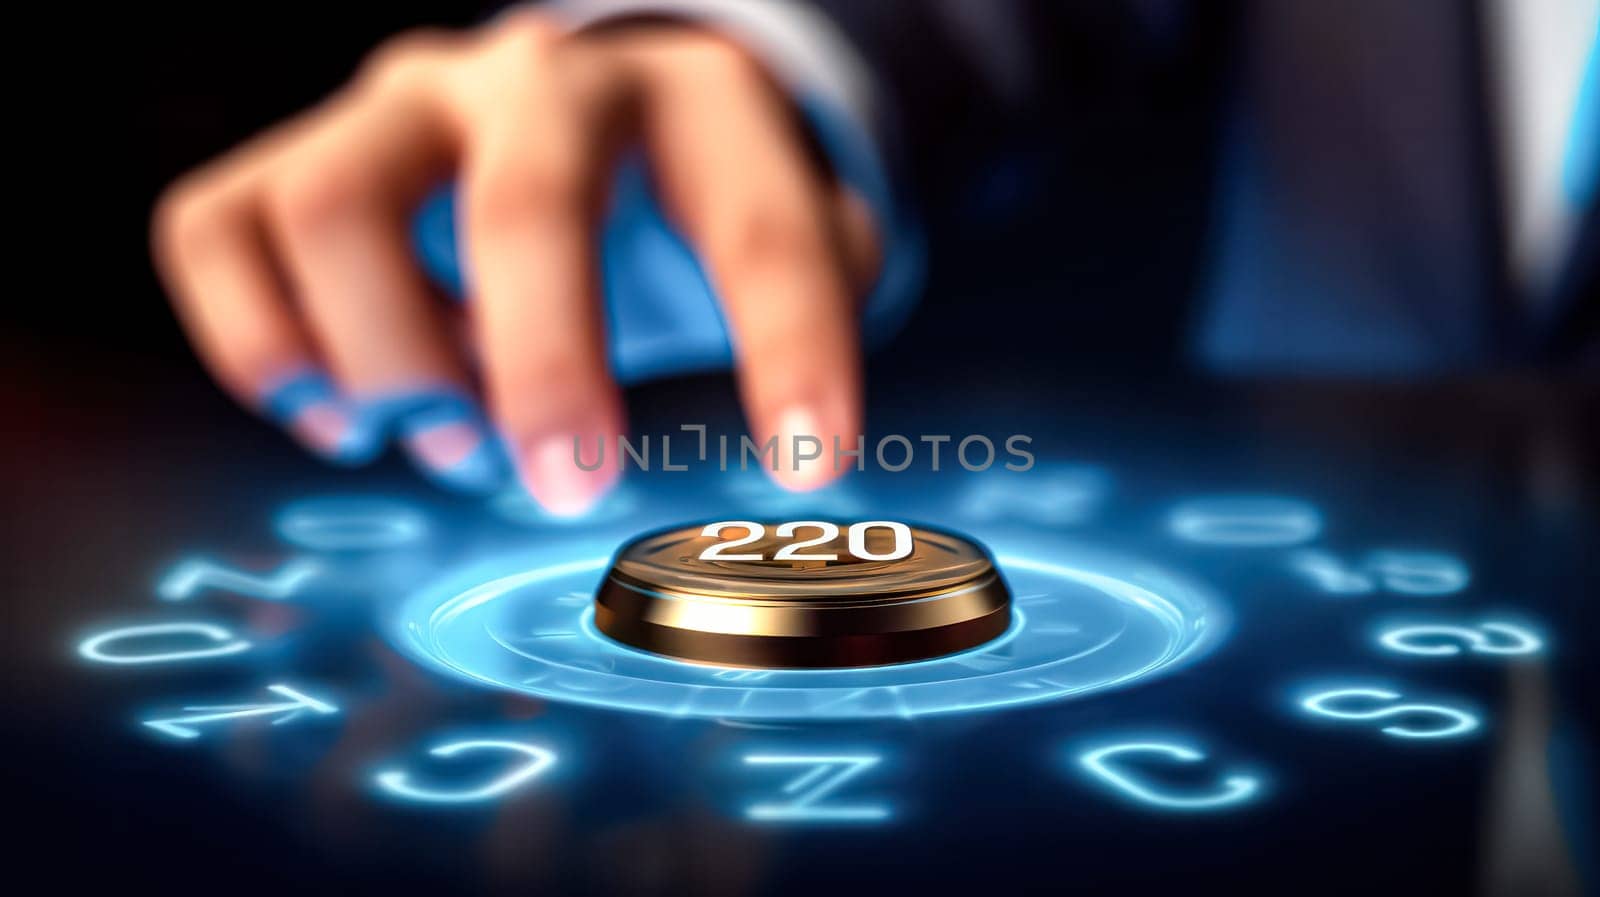 A man is pointing at a computer screen with a blue button in the middle. Concept of focus and determination as the man is trying to figure out what the button does